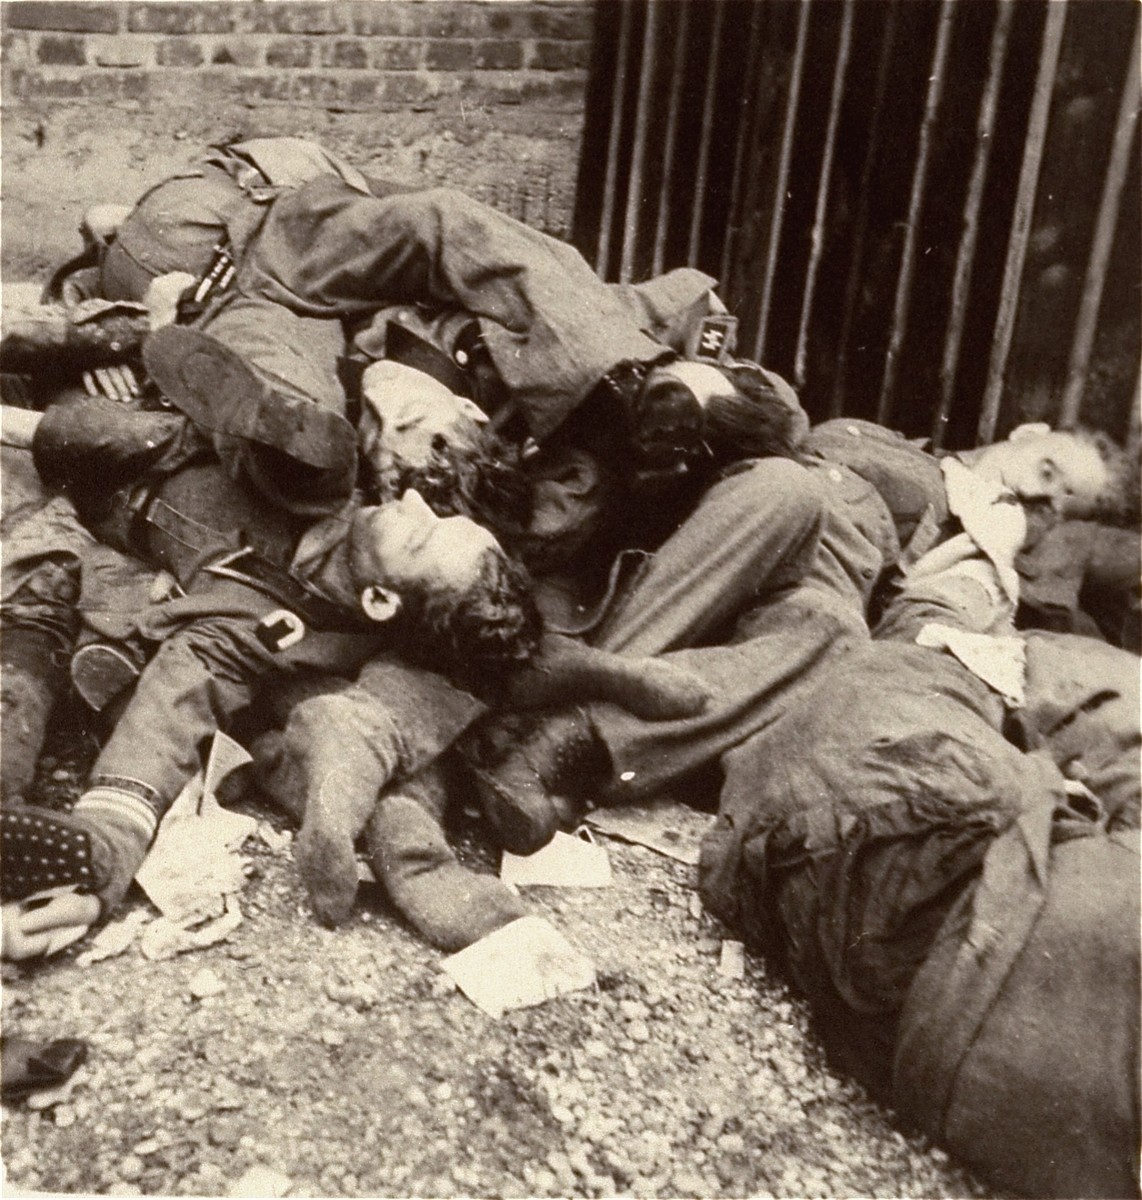 The bodies of SS personnel who were executed by U.S. troops during the liberation of Dachau.